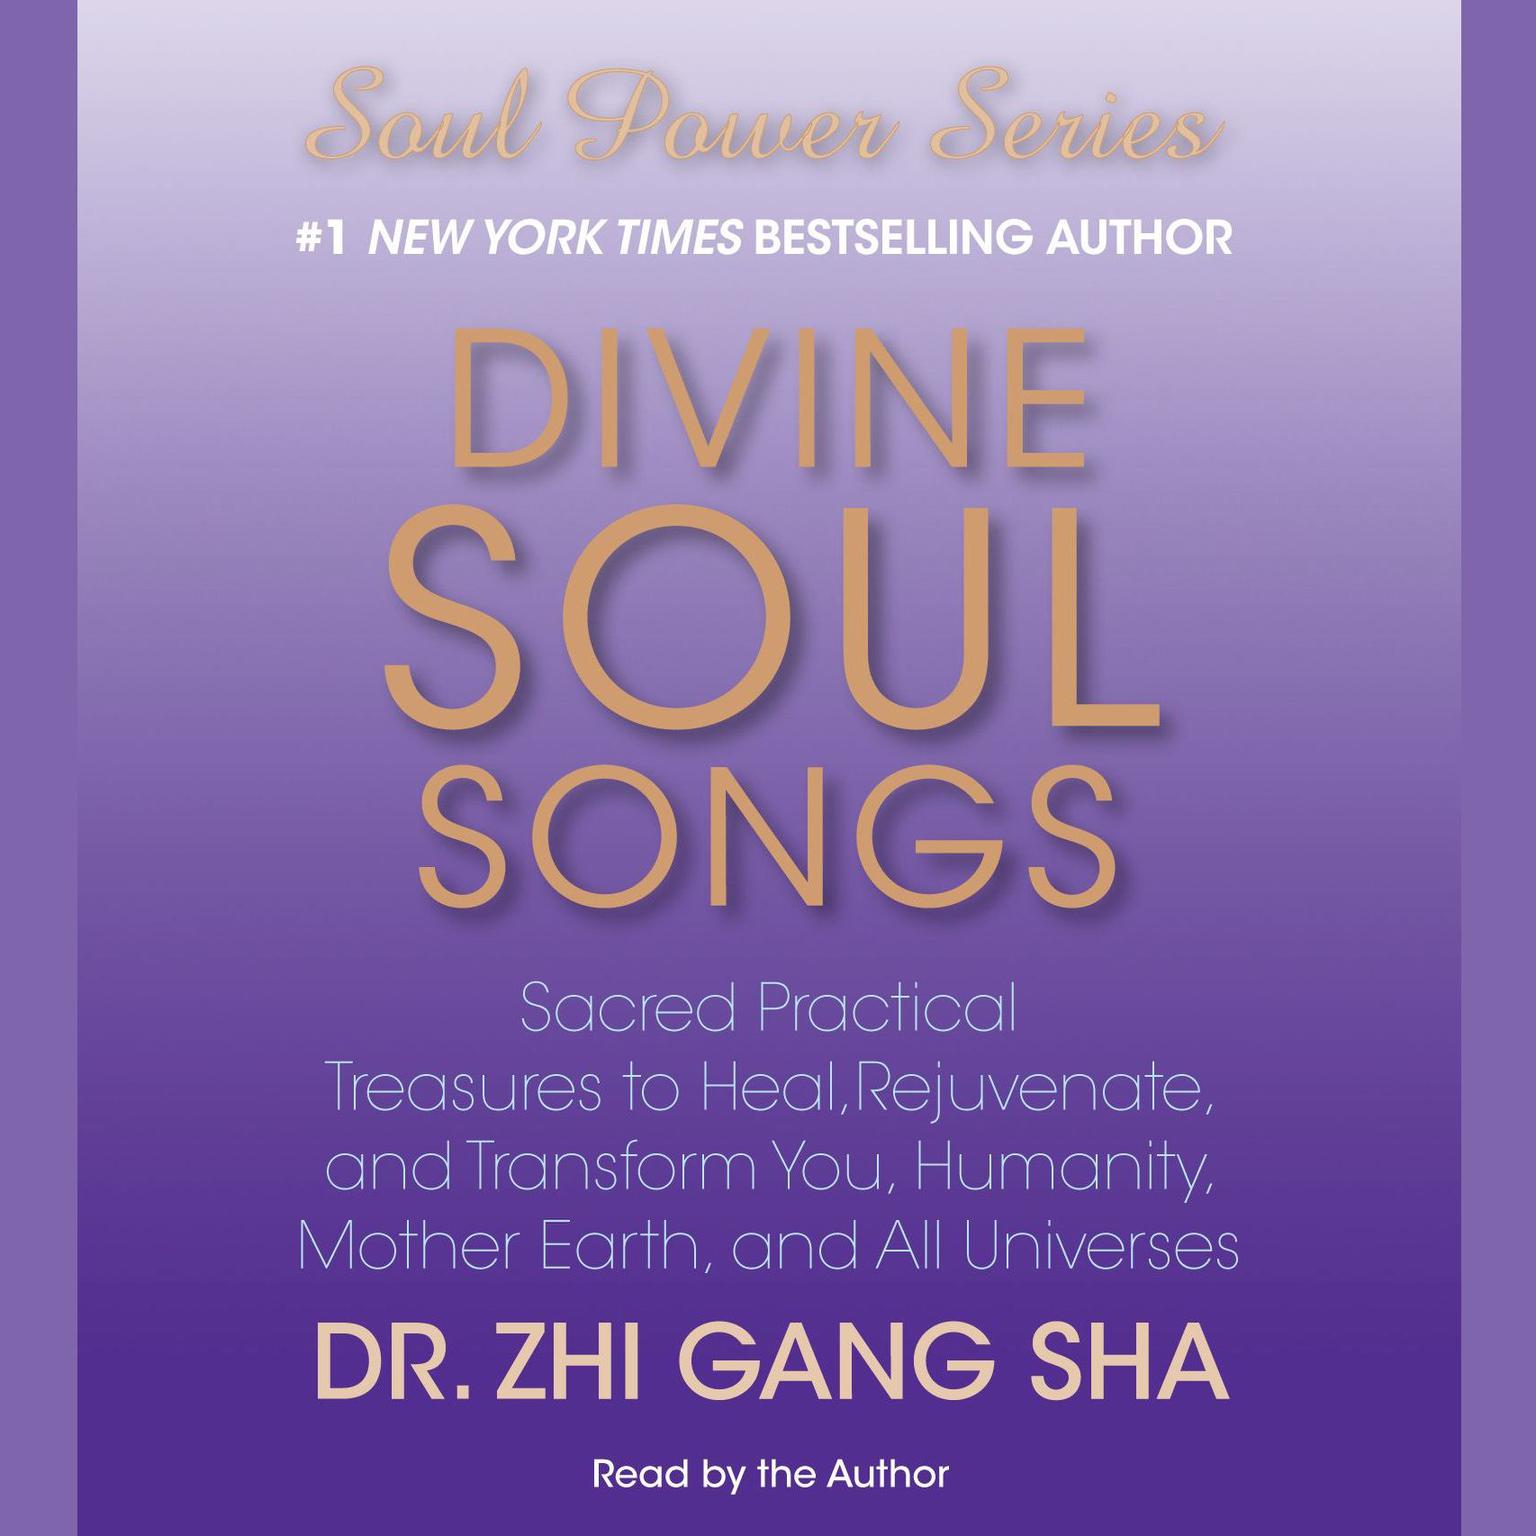 Divine Soul Songs (Abridged): Sacred Practical Treasures to Heal, Rejuvenate, and Transform You, Humanity, Mother Earth, and All Universes Audiobook, by Dr. Zhi Gang Sha